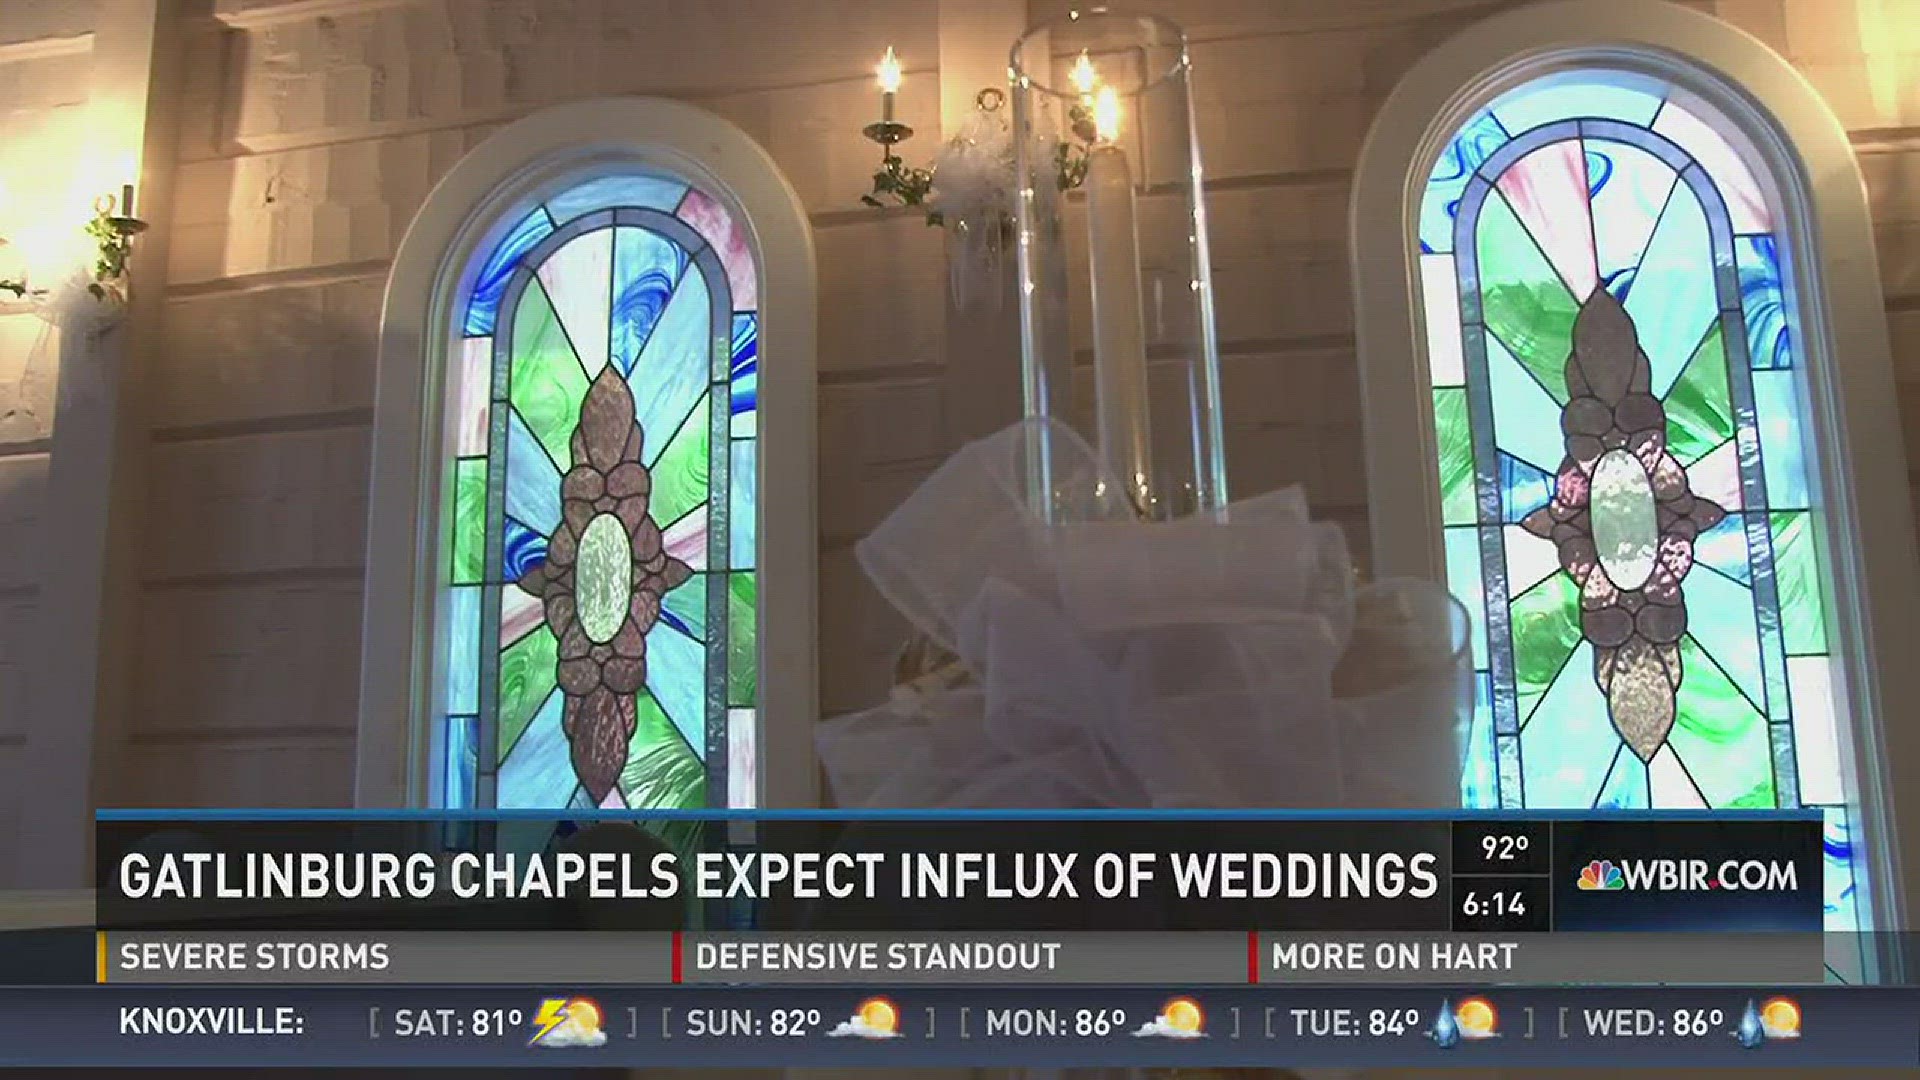 Gatlinburg and the Smoky Mountains are already popular wedding destinations. The Supreme Court ruling could have a big impact on East Tennessee chapels.